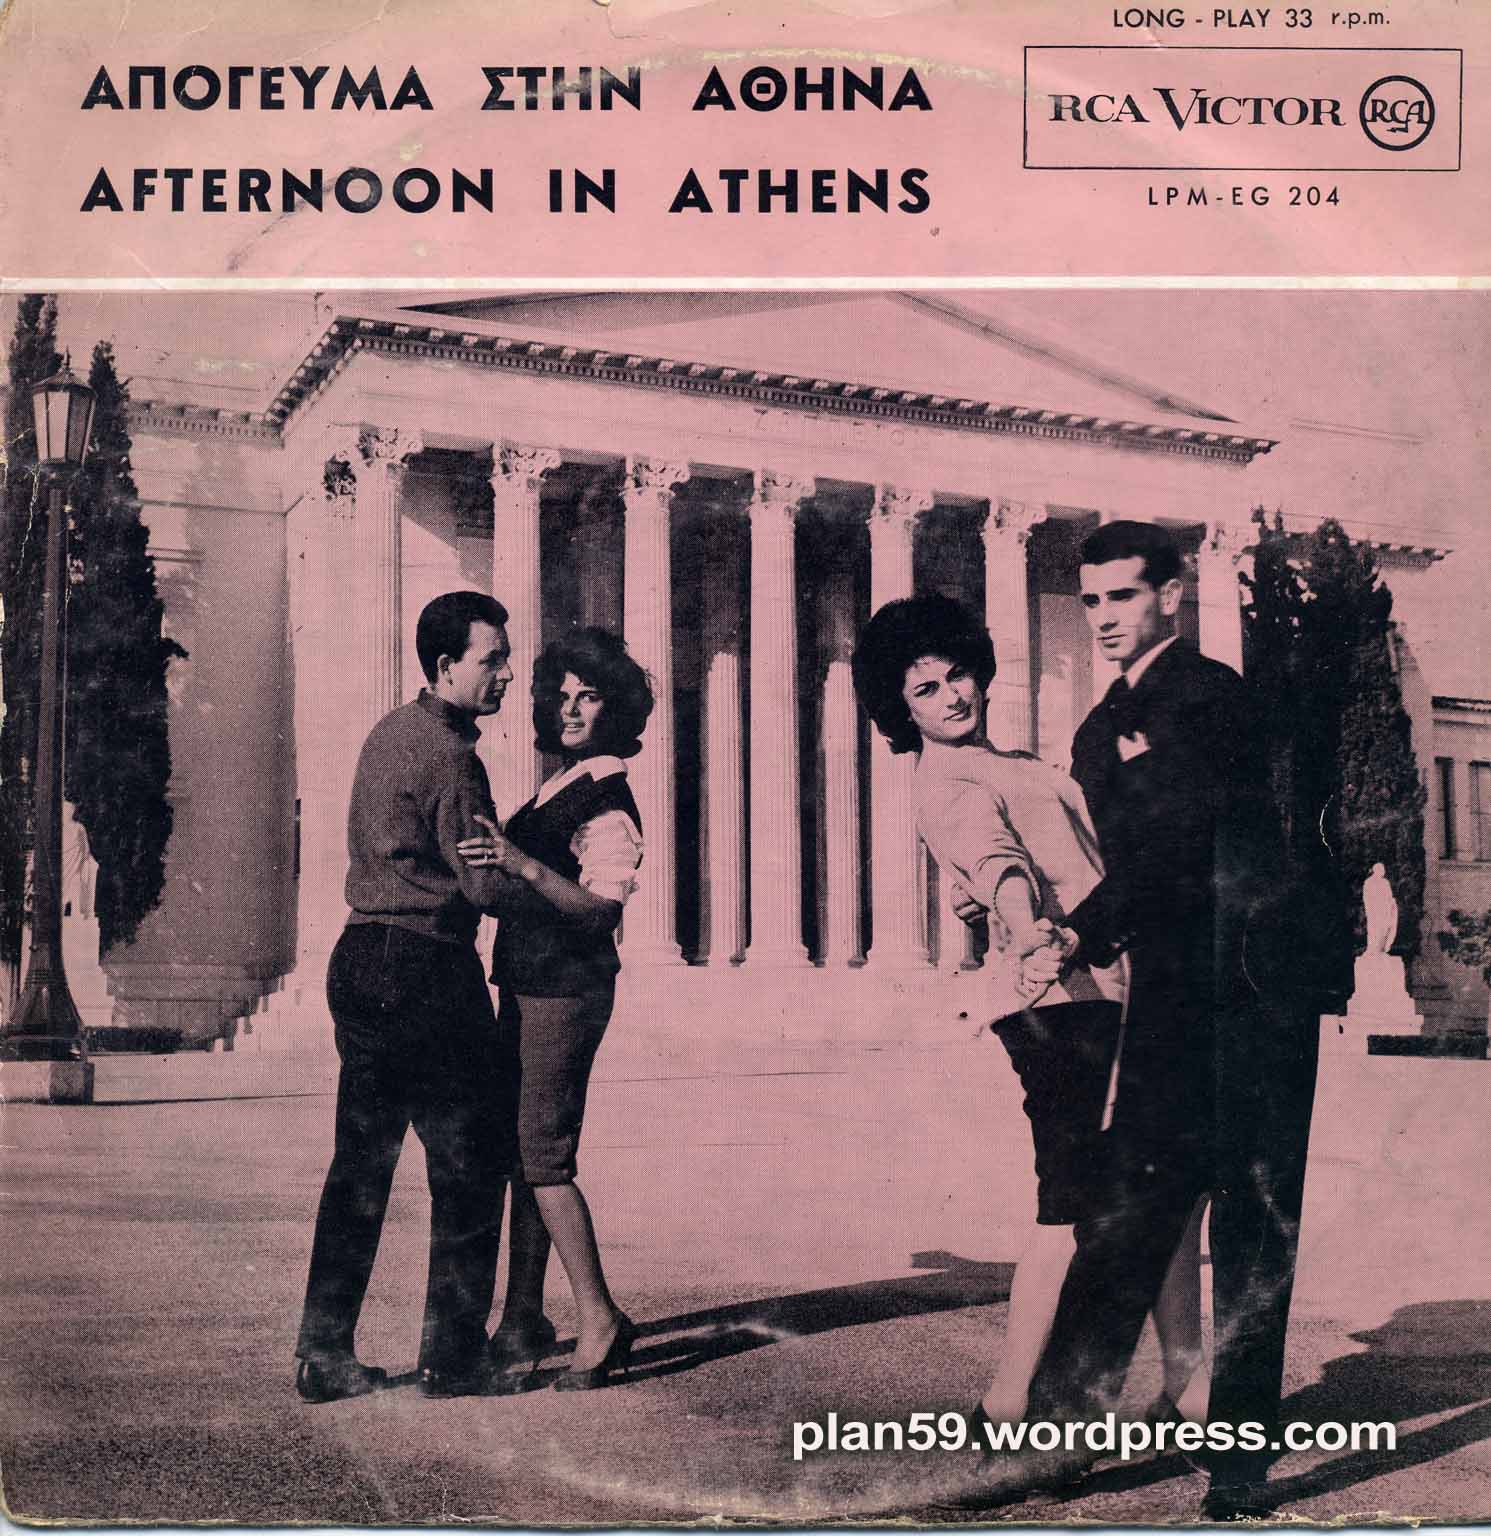 afternoon-in-athens-10-inch.jpg